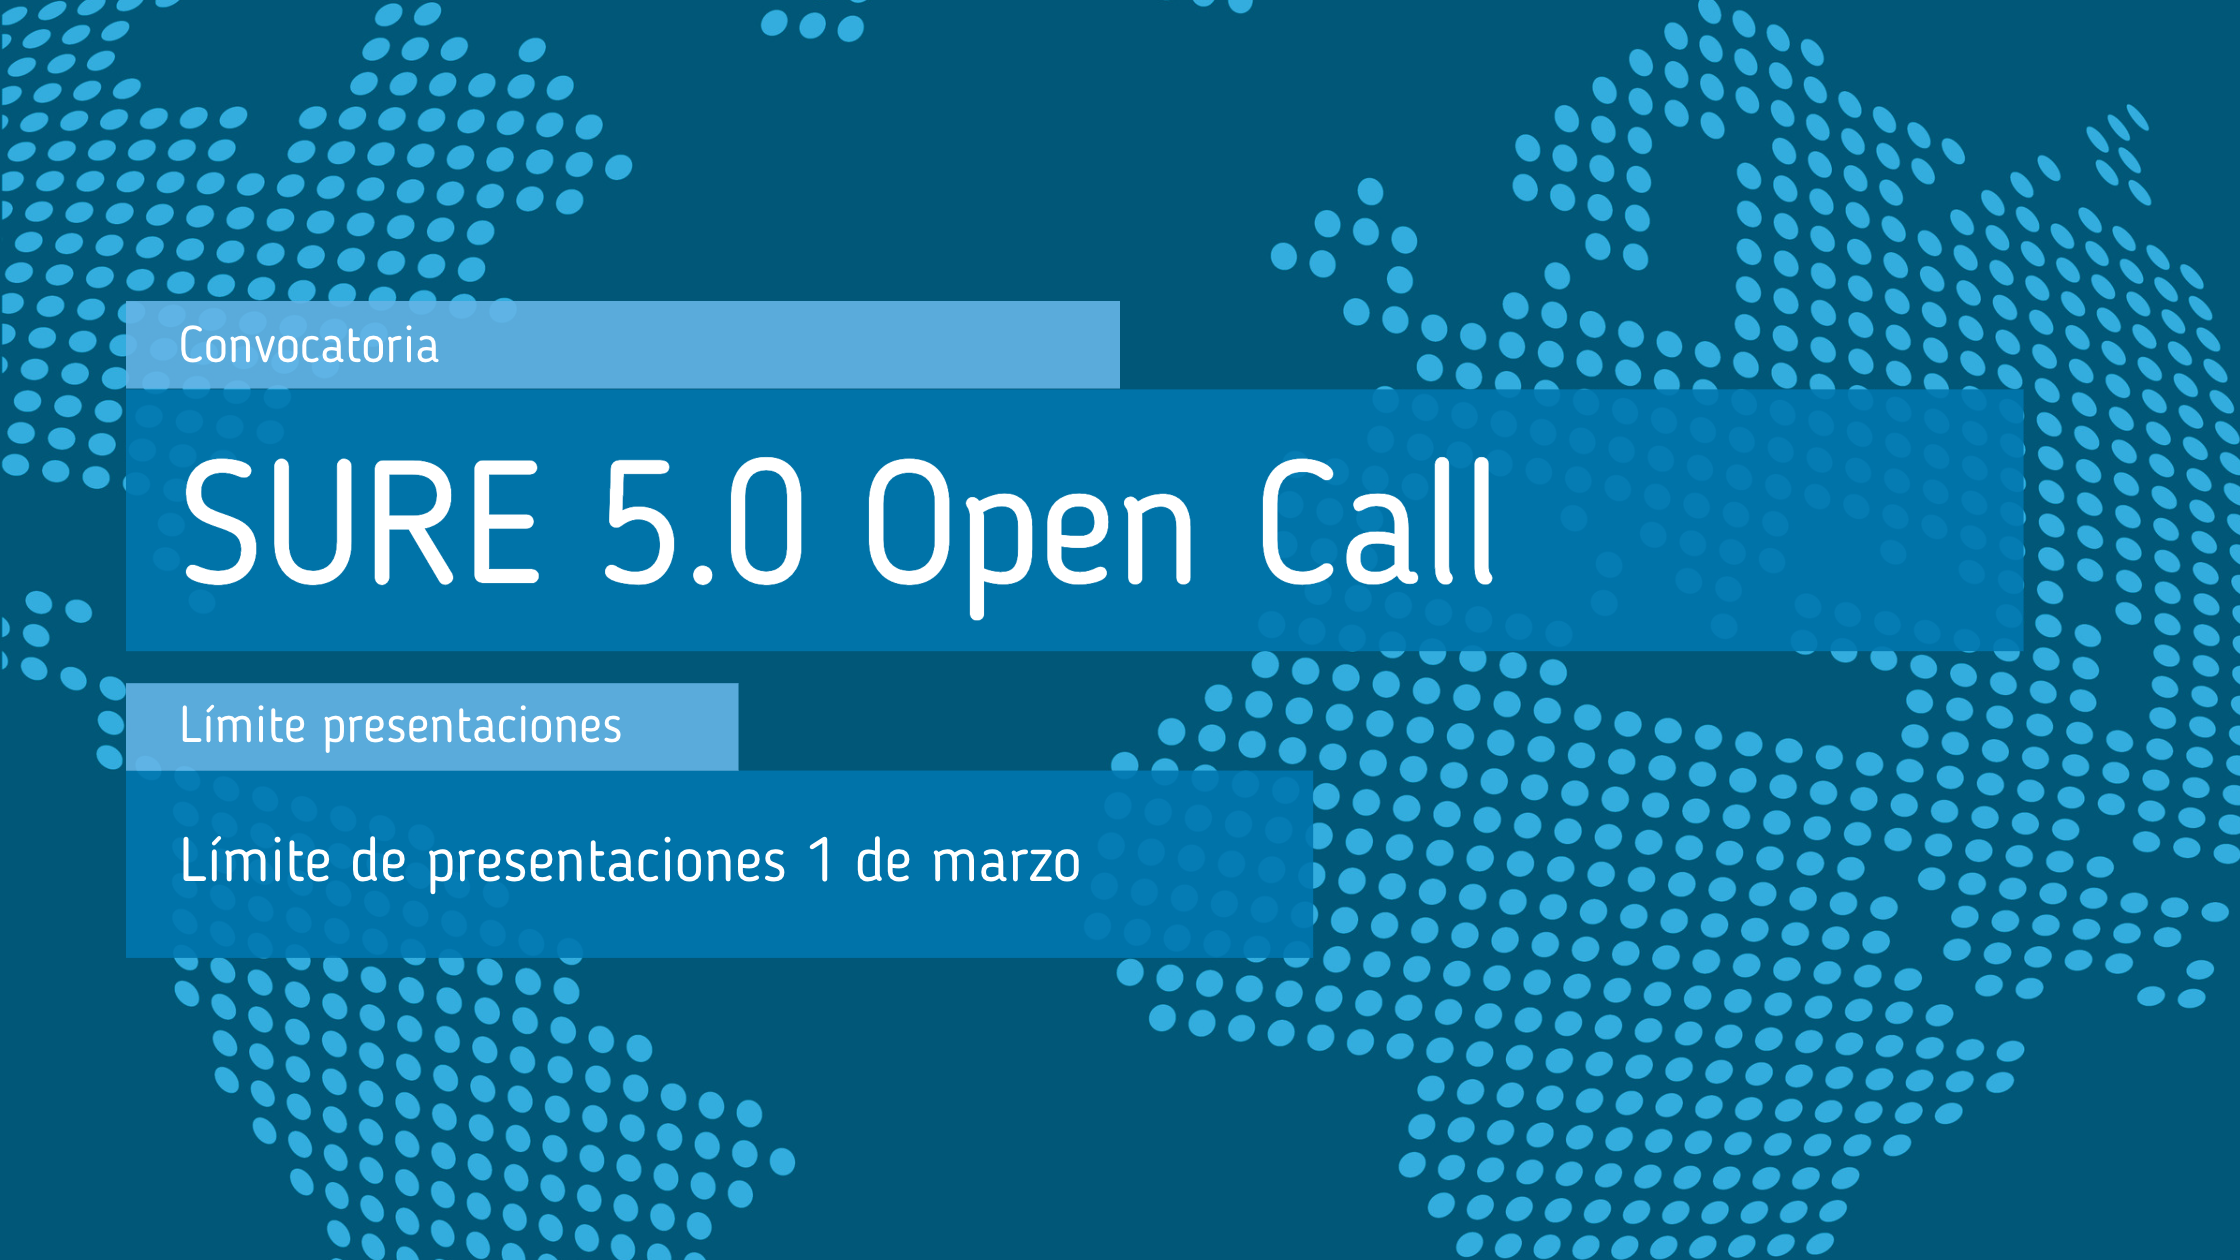 SURE_5_0_Open_Call